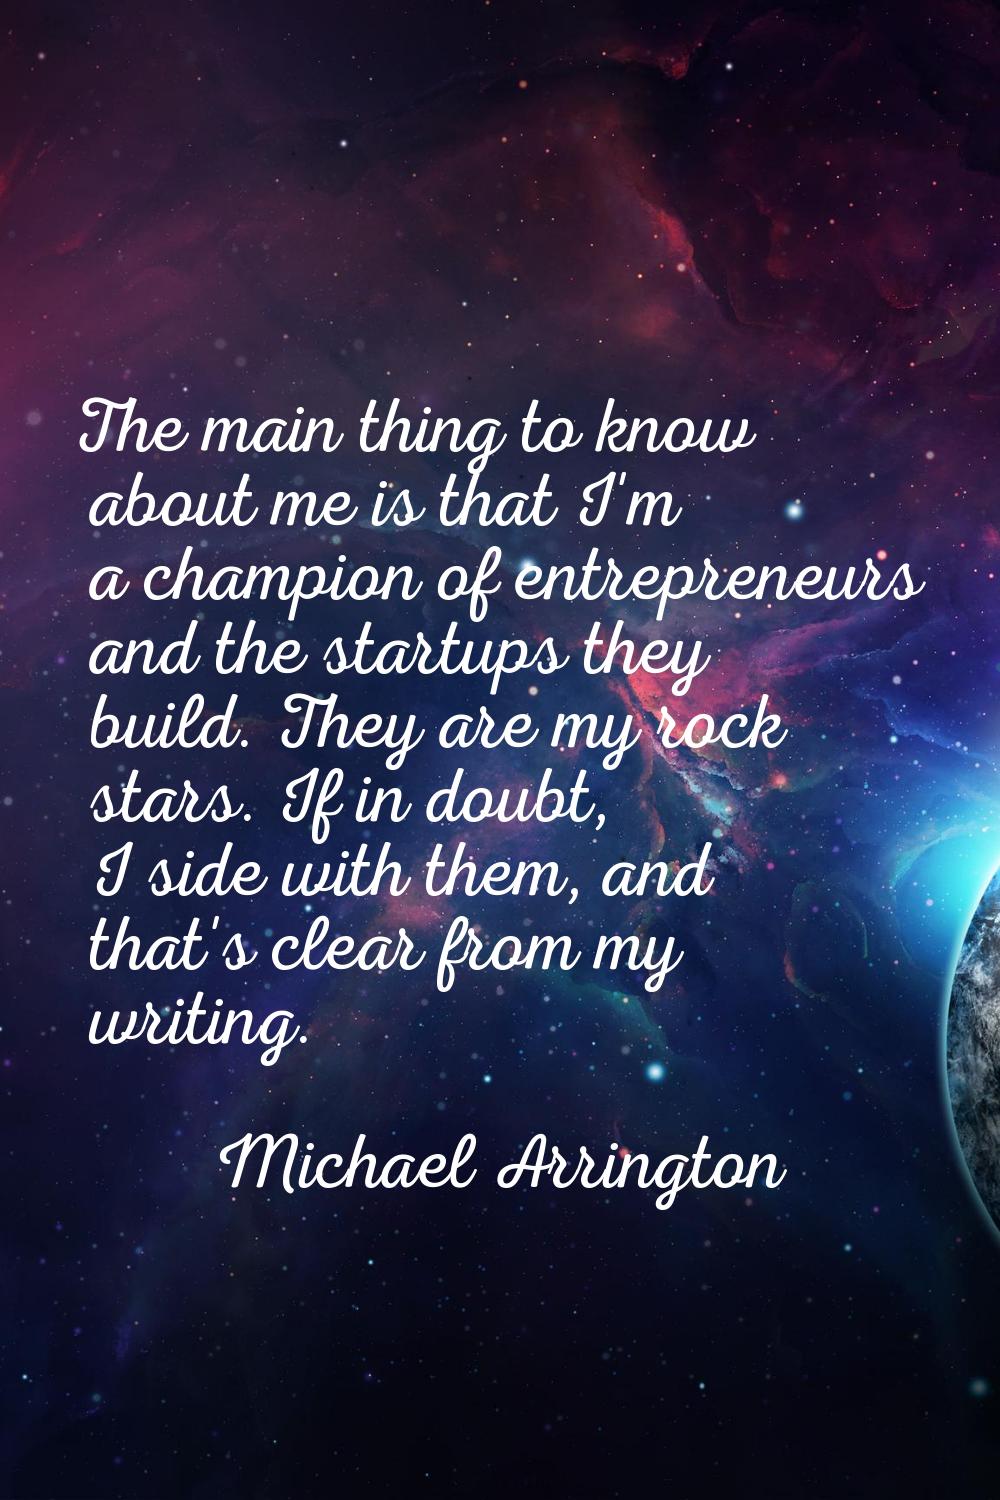 The main thing to know about me is that I'm a champion of entrepreneurs and the startups they build